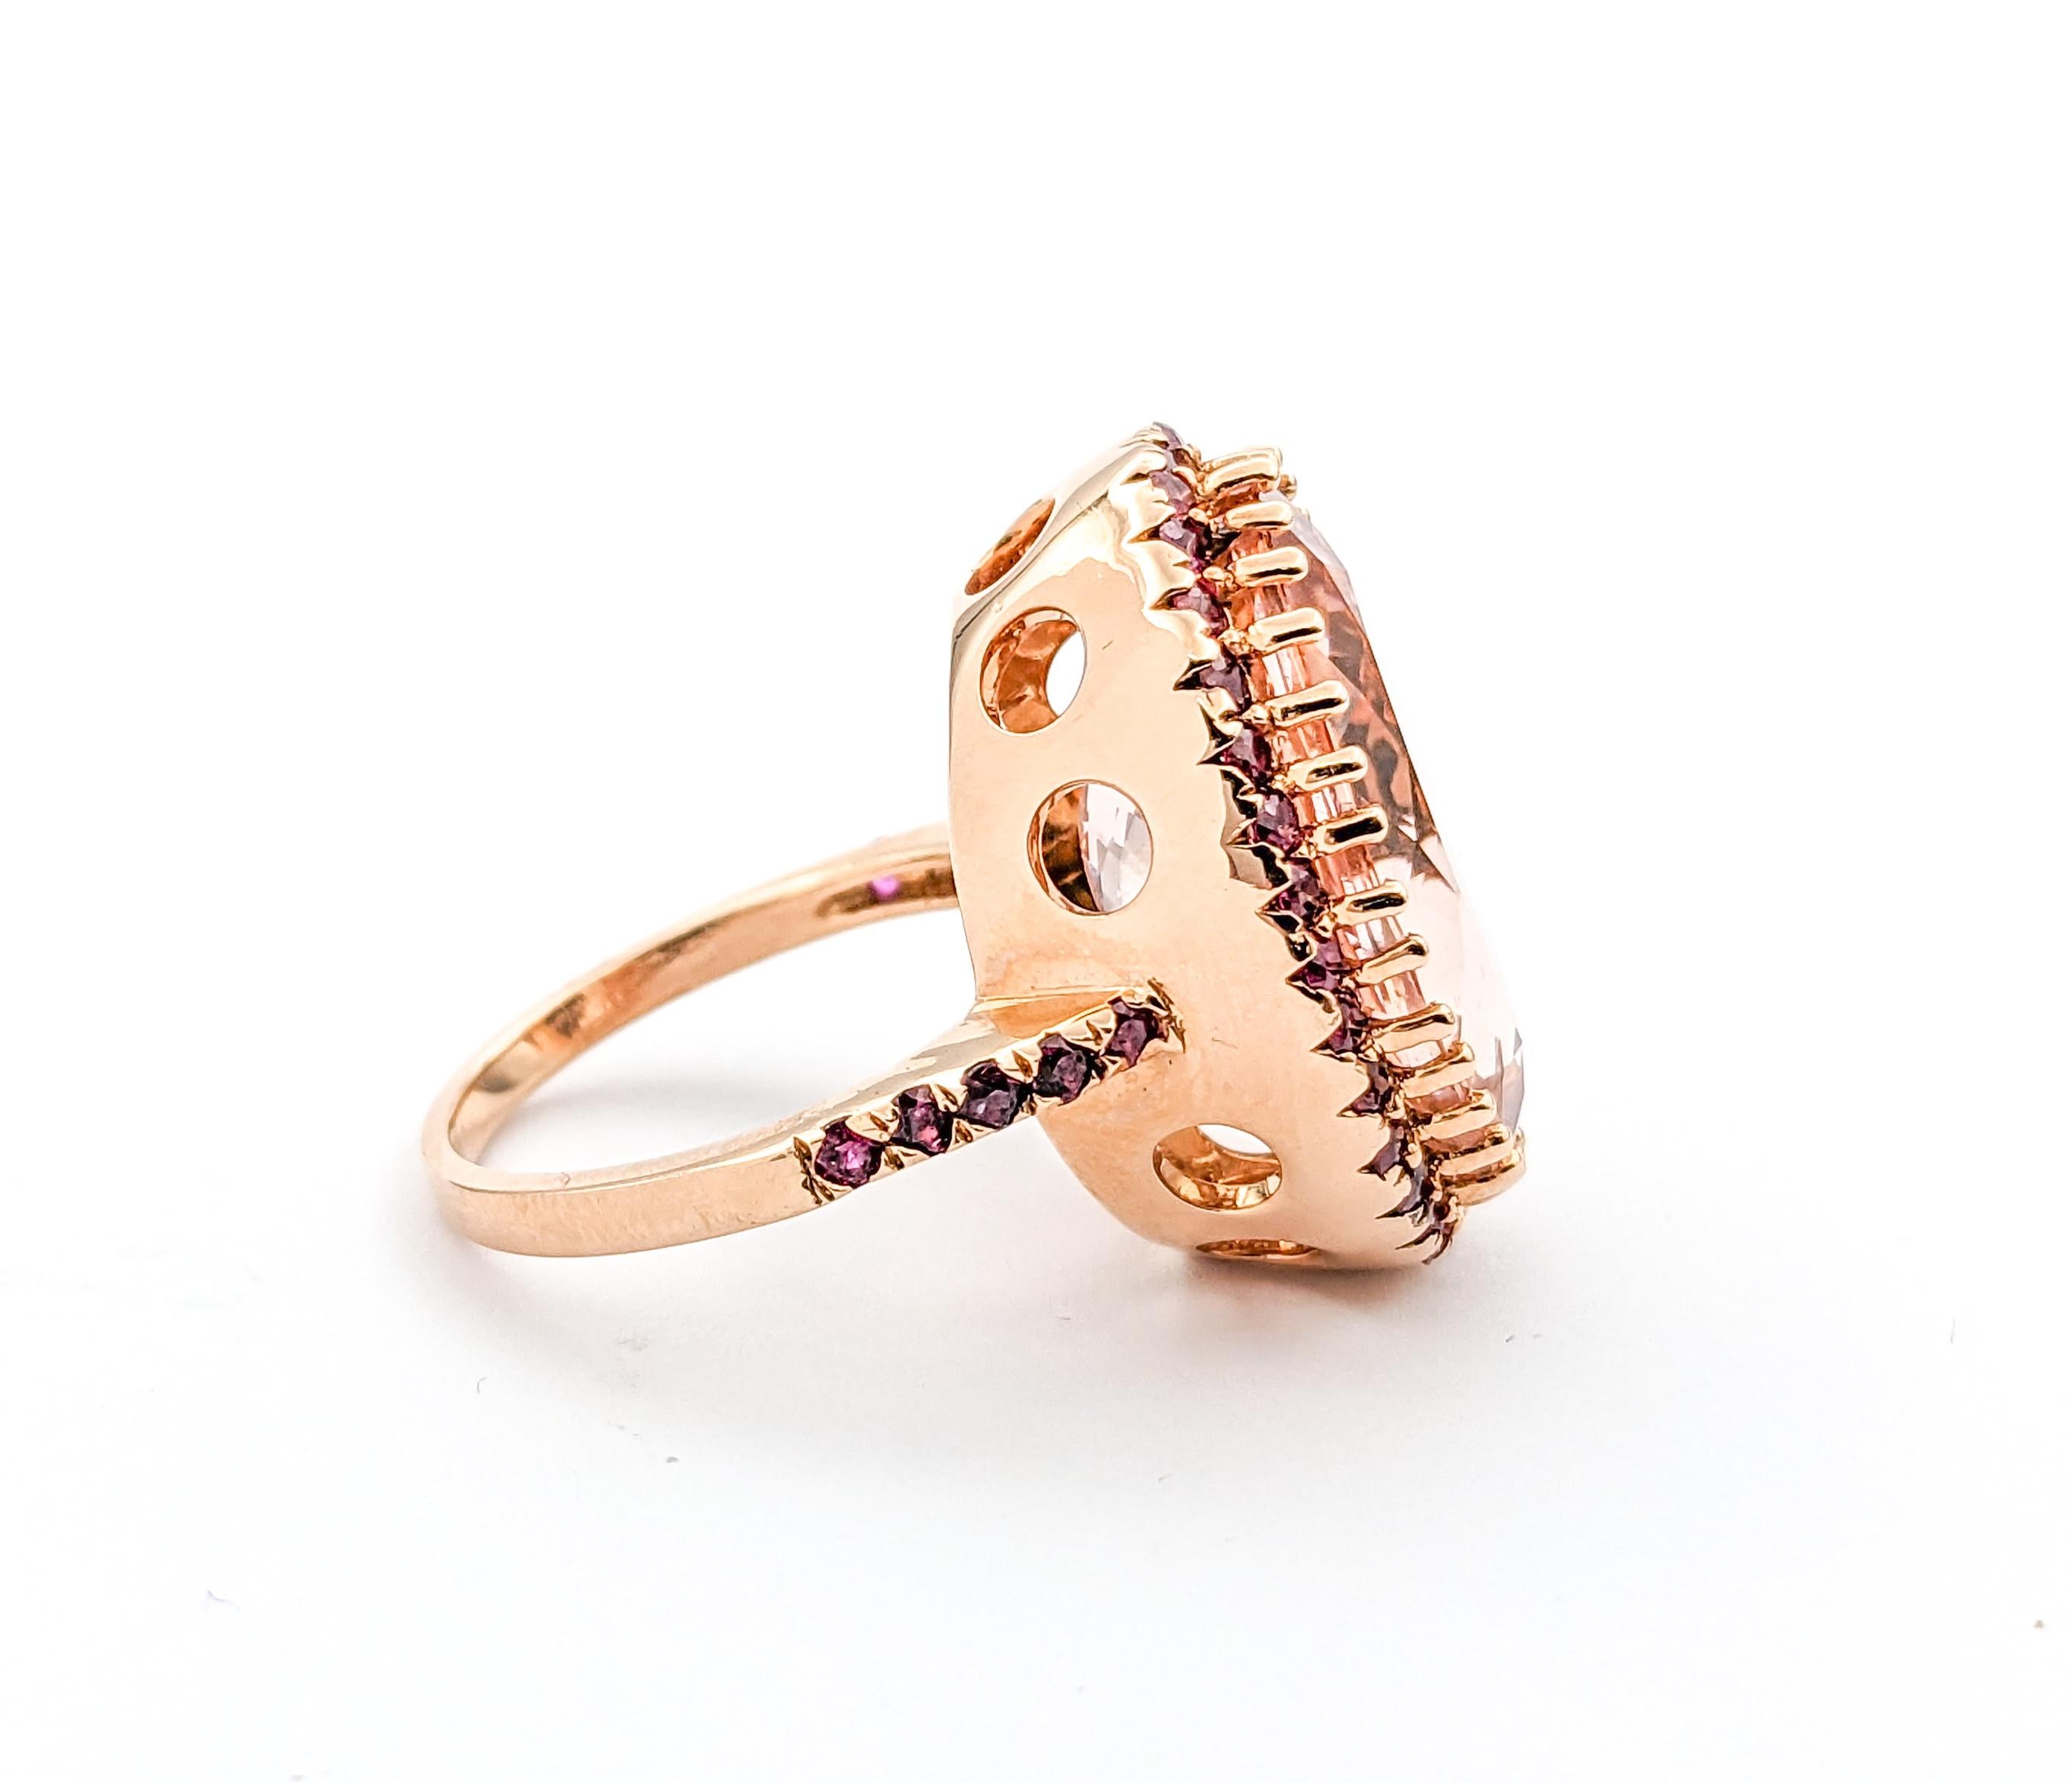 Women's Fabulous Morganite & Ruby Cocktail Ring For Sale